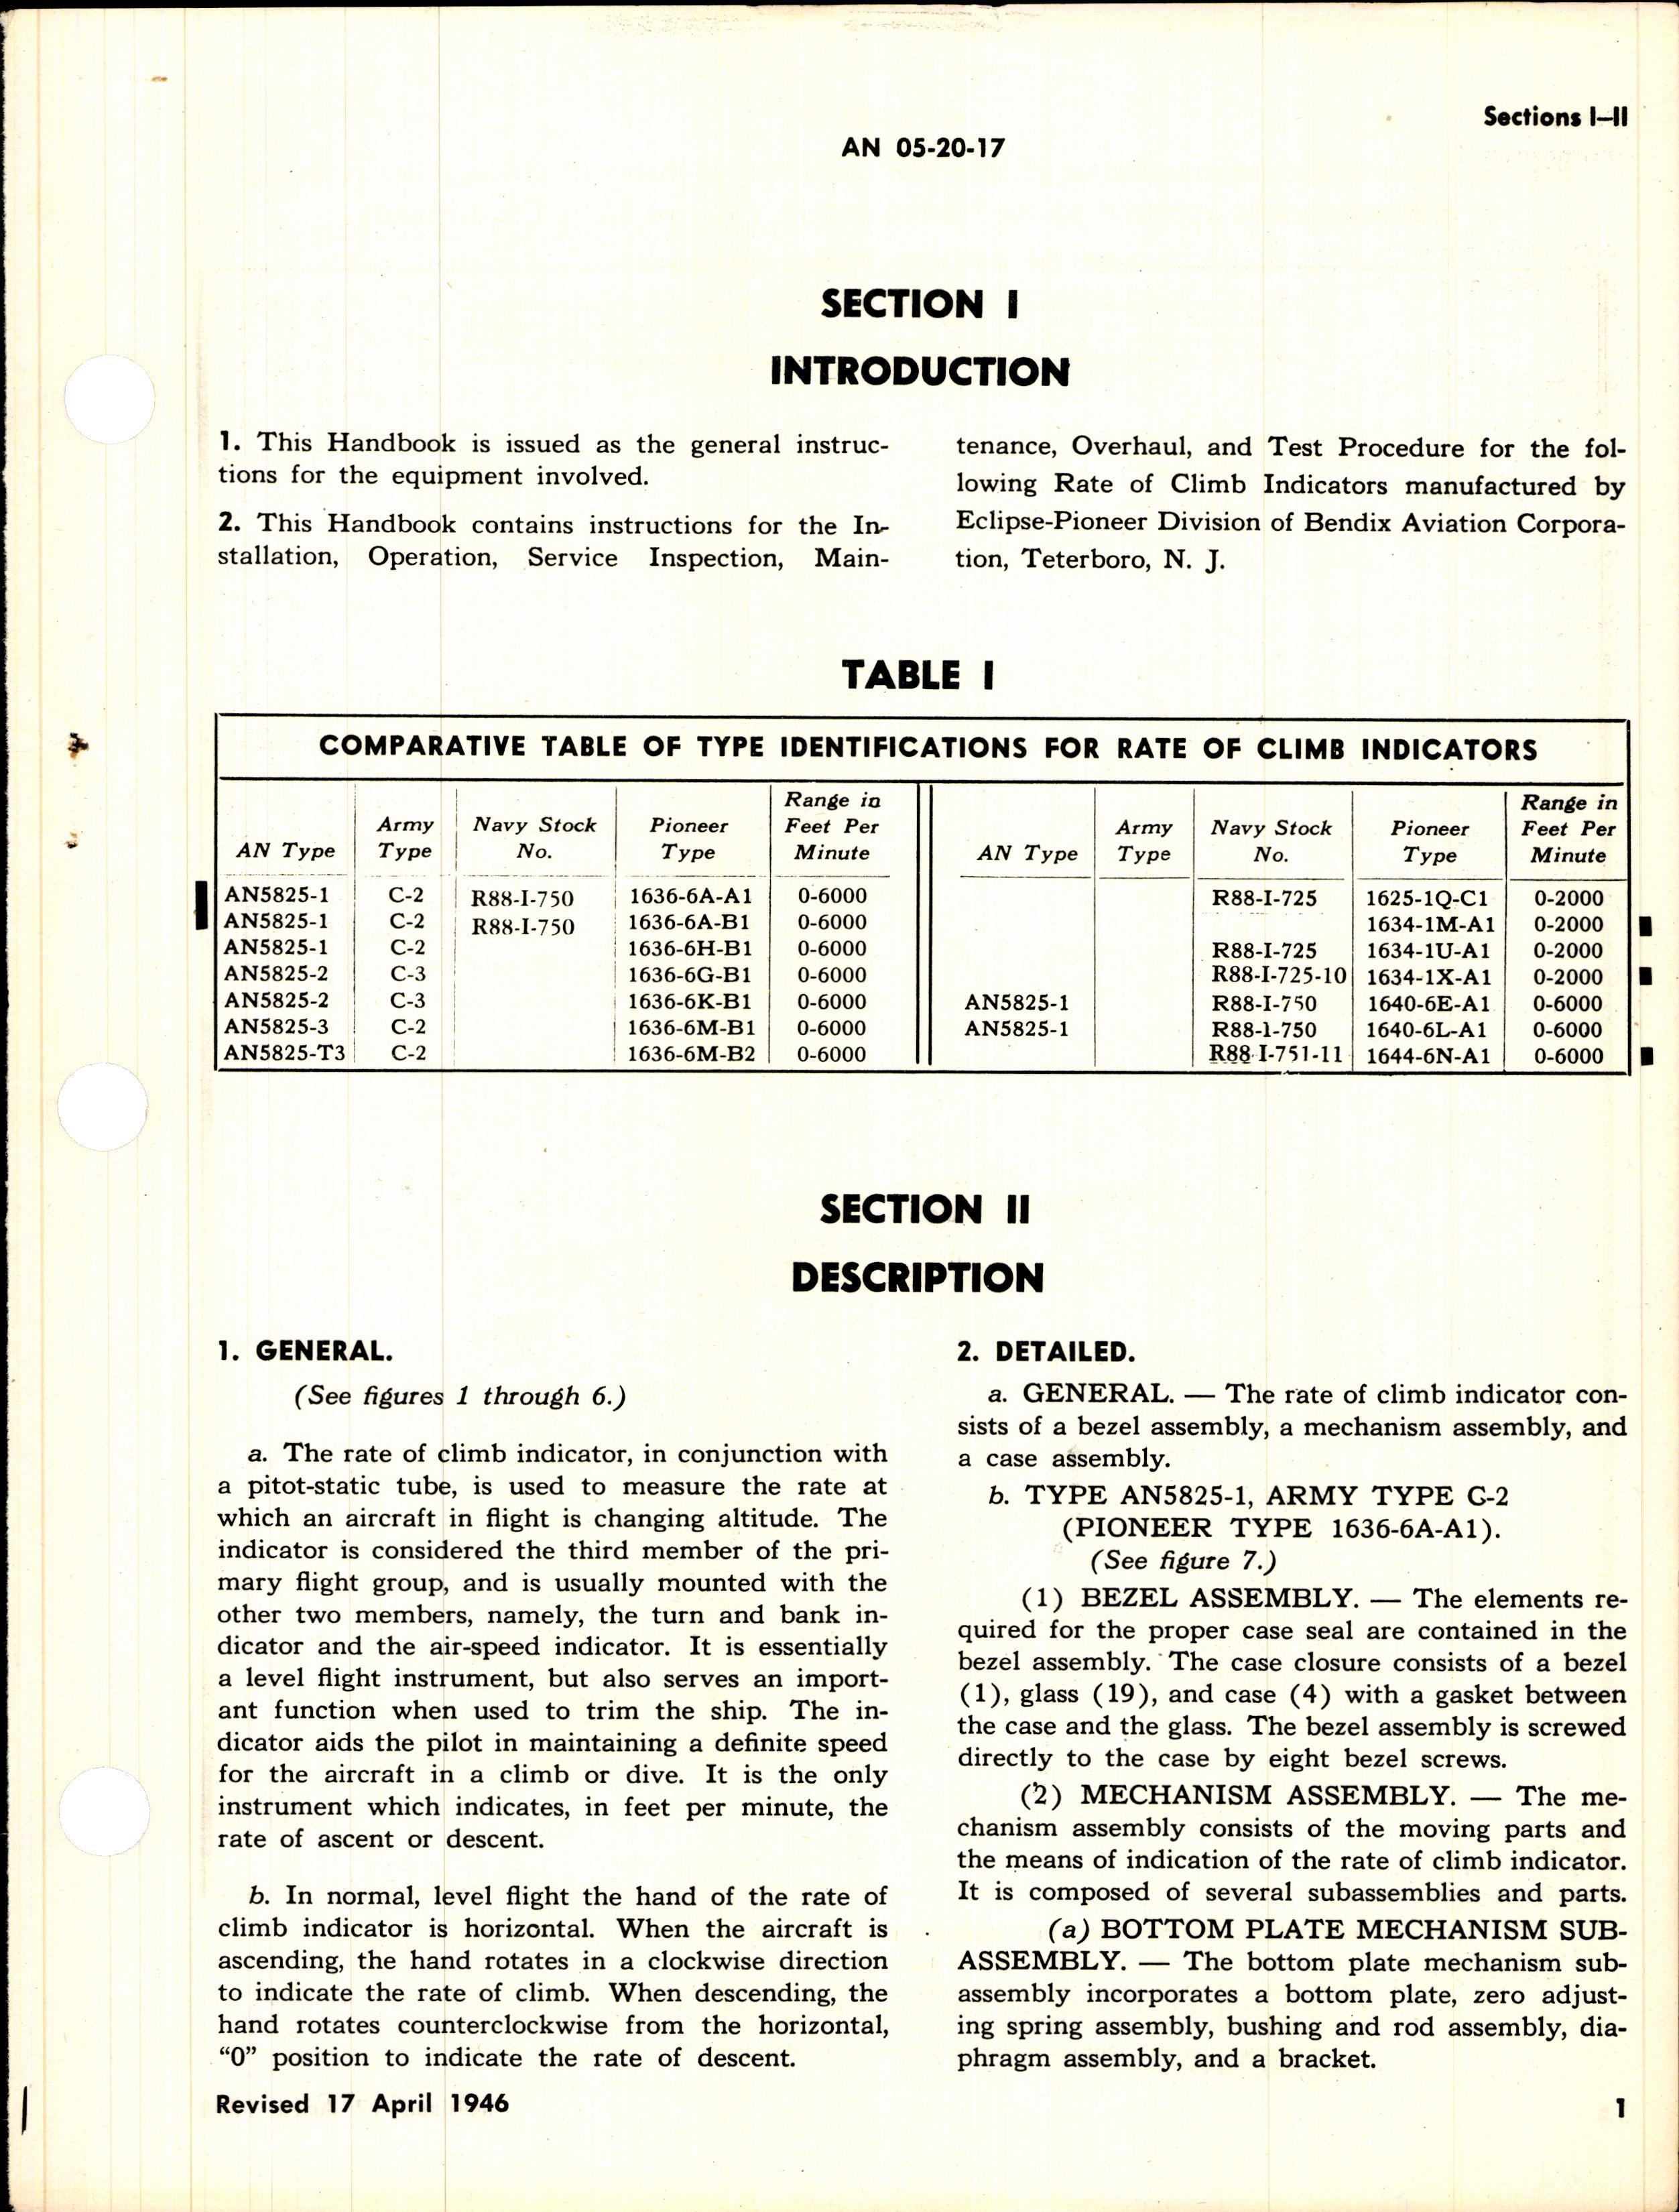 Sample page 5 from AirCorps Library document: Operation, Service, & Overhaul Instructions with Parts Catalog for Type C-2 and C-3 Rate of Climb Indicators